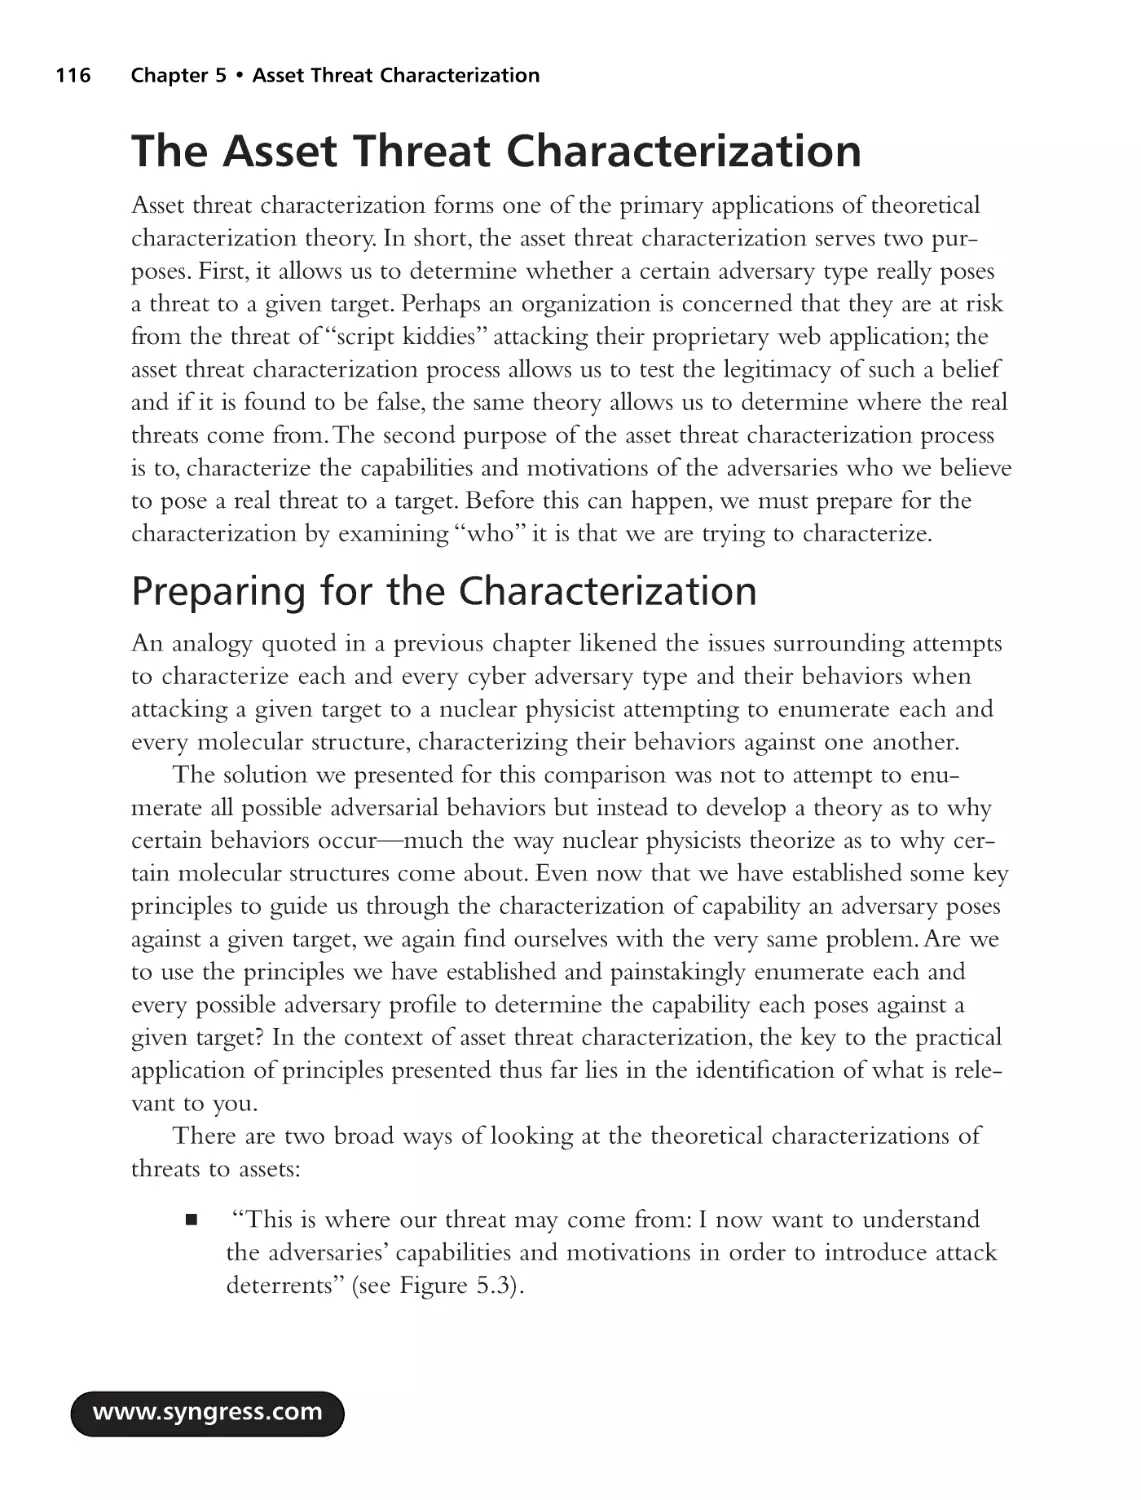 The Asset Threat Characterization
Preparing for the Characterization